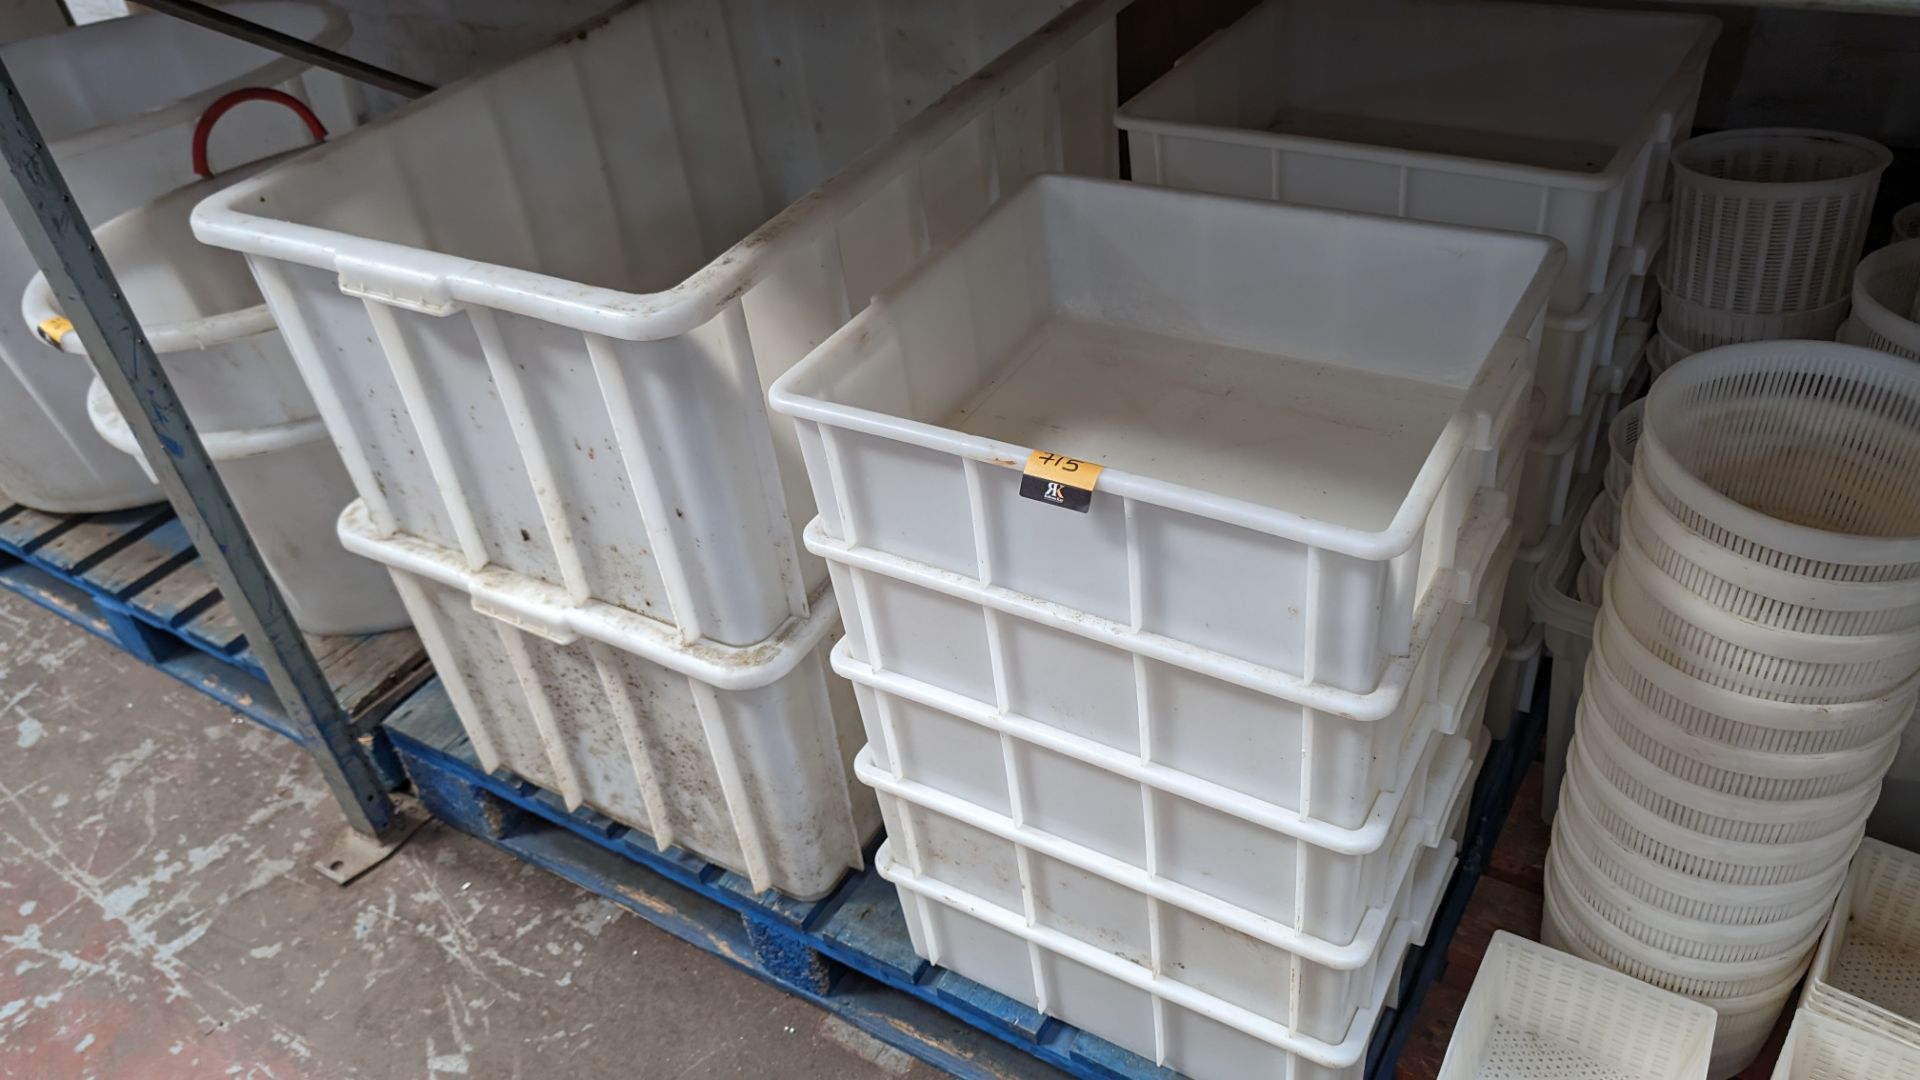 Contents of a pallet of large rectangular and square heavy duty plastic storage bins.